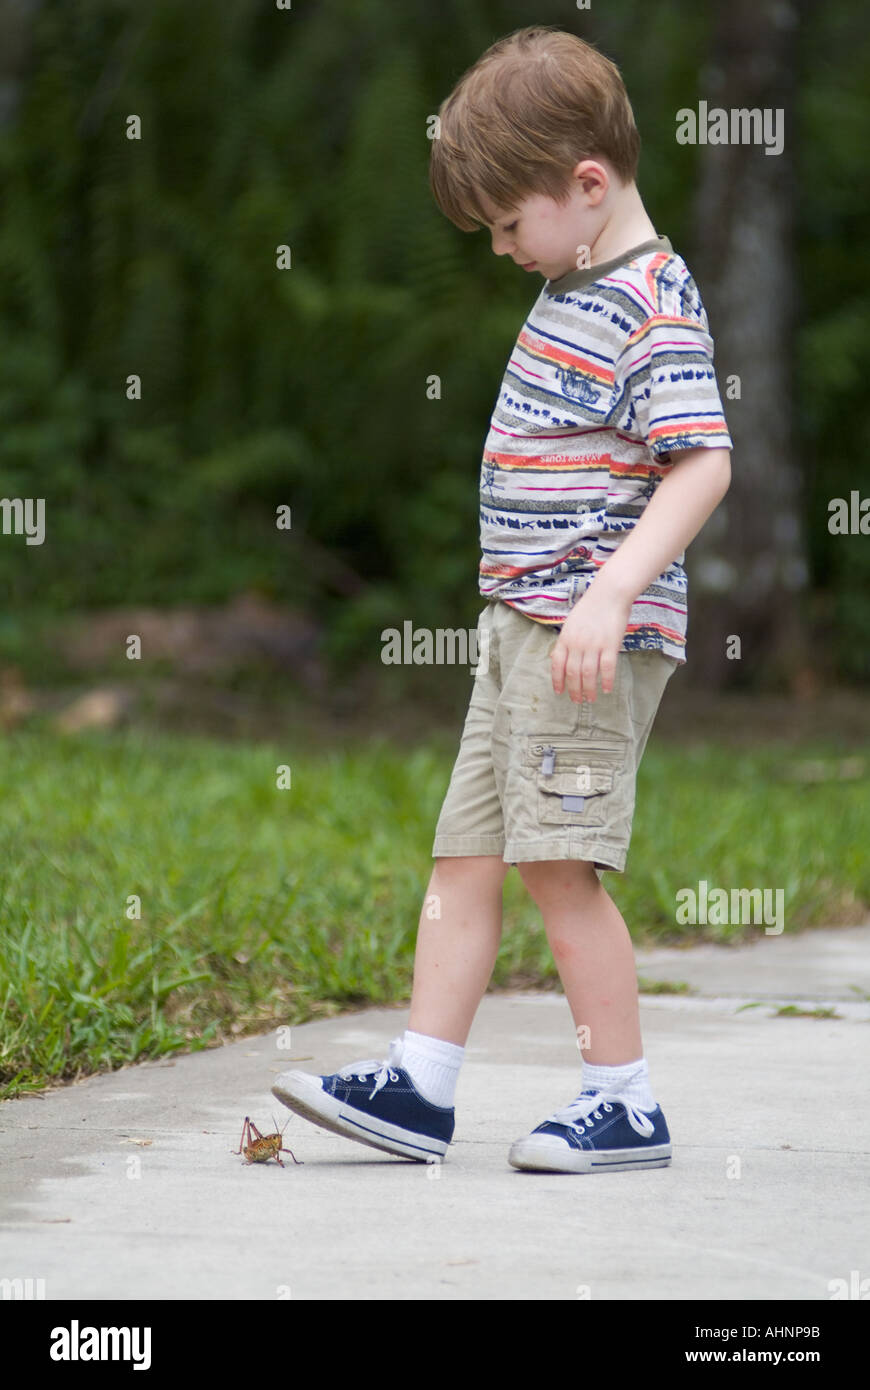 boy with bug insects grass hopper grasshopper stepping stepped on squish squashed big and small power crush Stock Photo